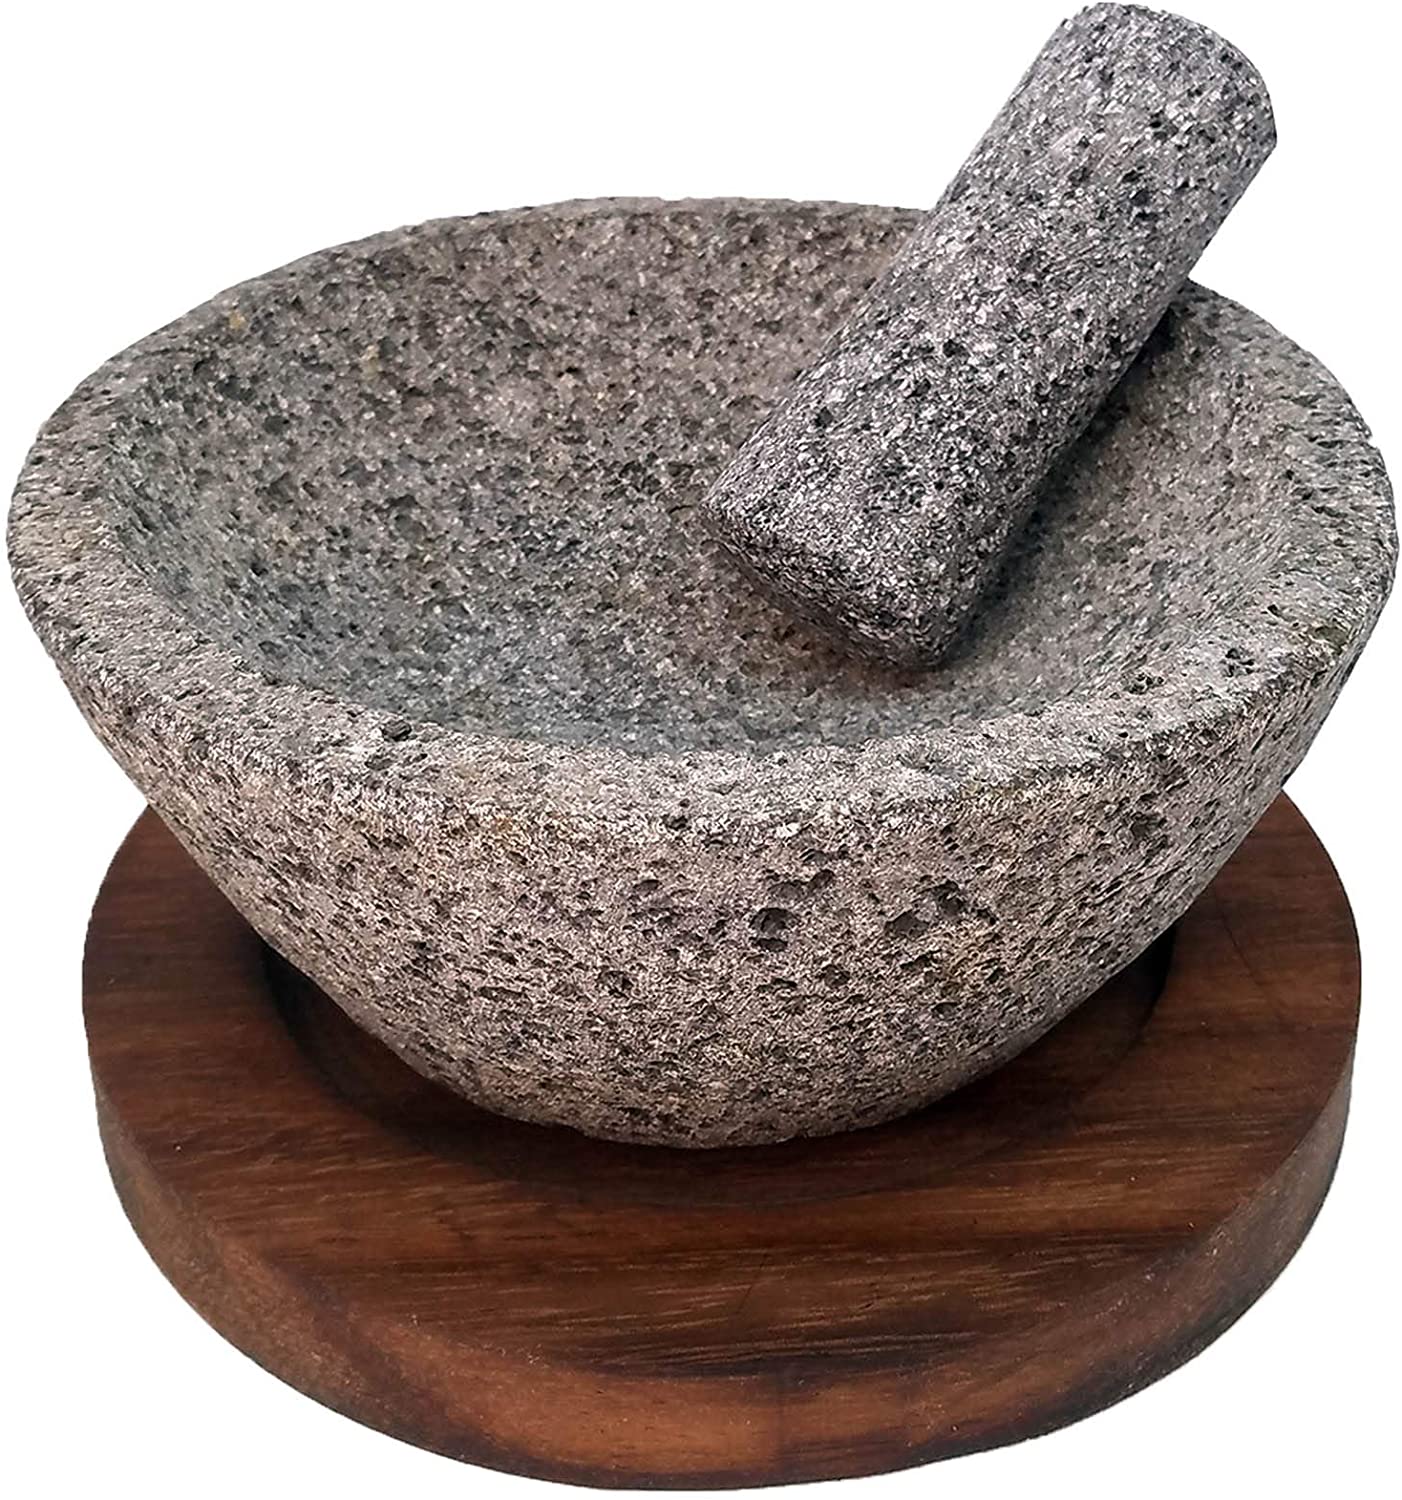 VOLCANIC ROCK PRODUCTS / Round 7'' Mortar and Pestle Set with Parota Wood Serving Board / Treat your guests with delicious homemade salsas and guacamole! This beautifully crafted 7'' round mortar and pestle set is just right for you.